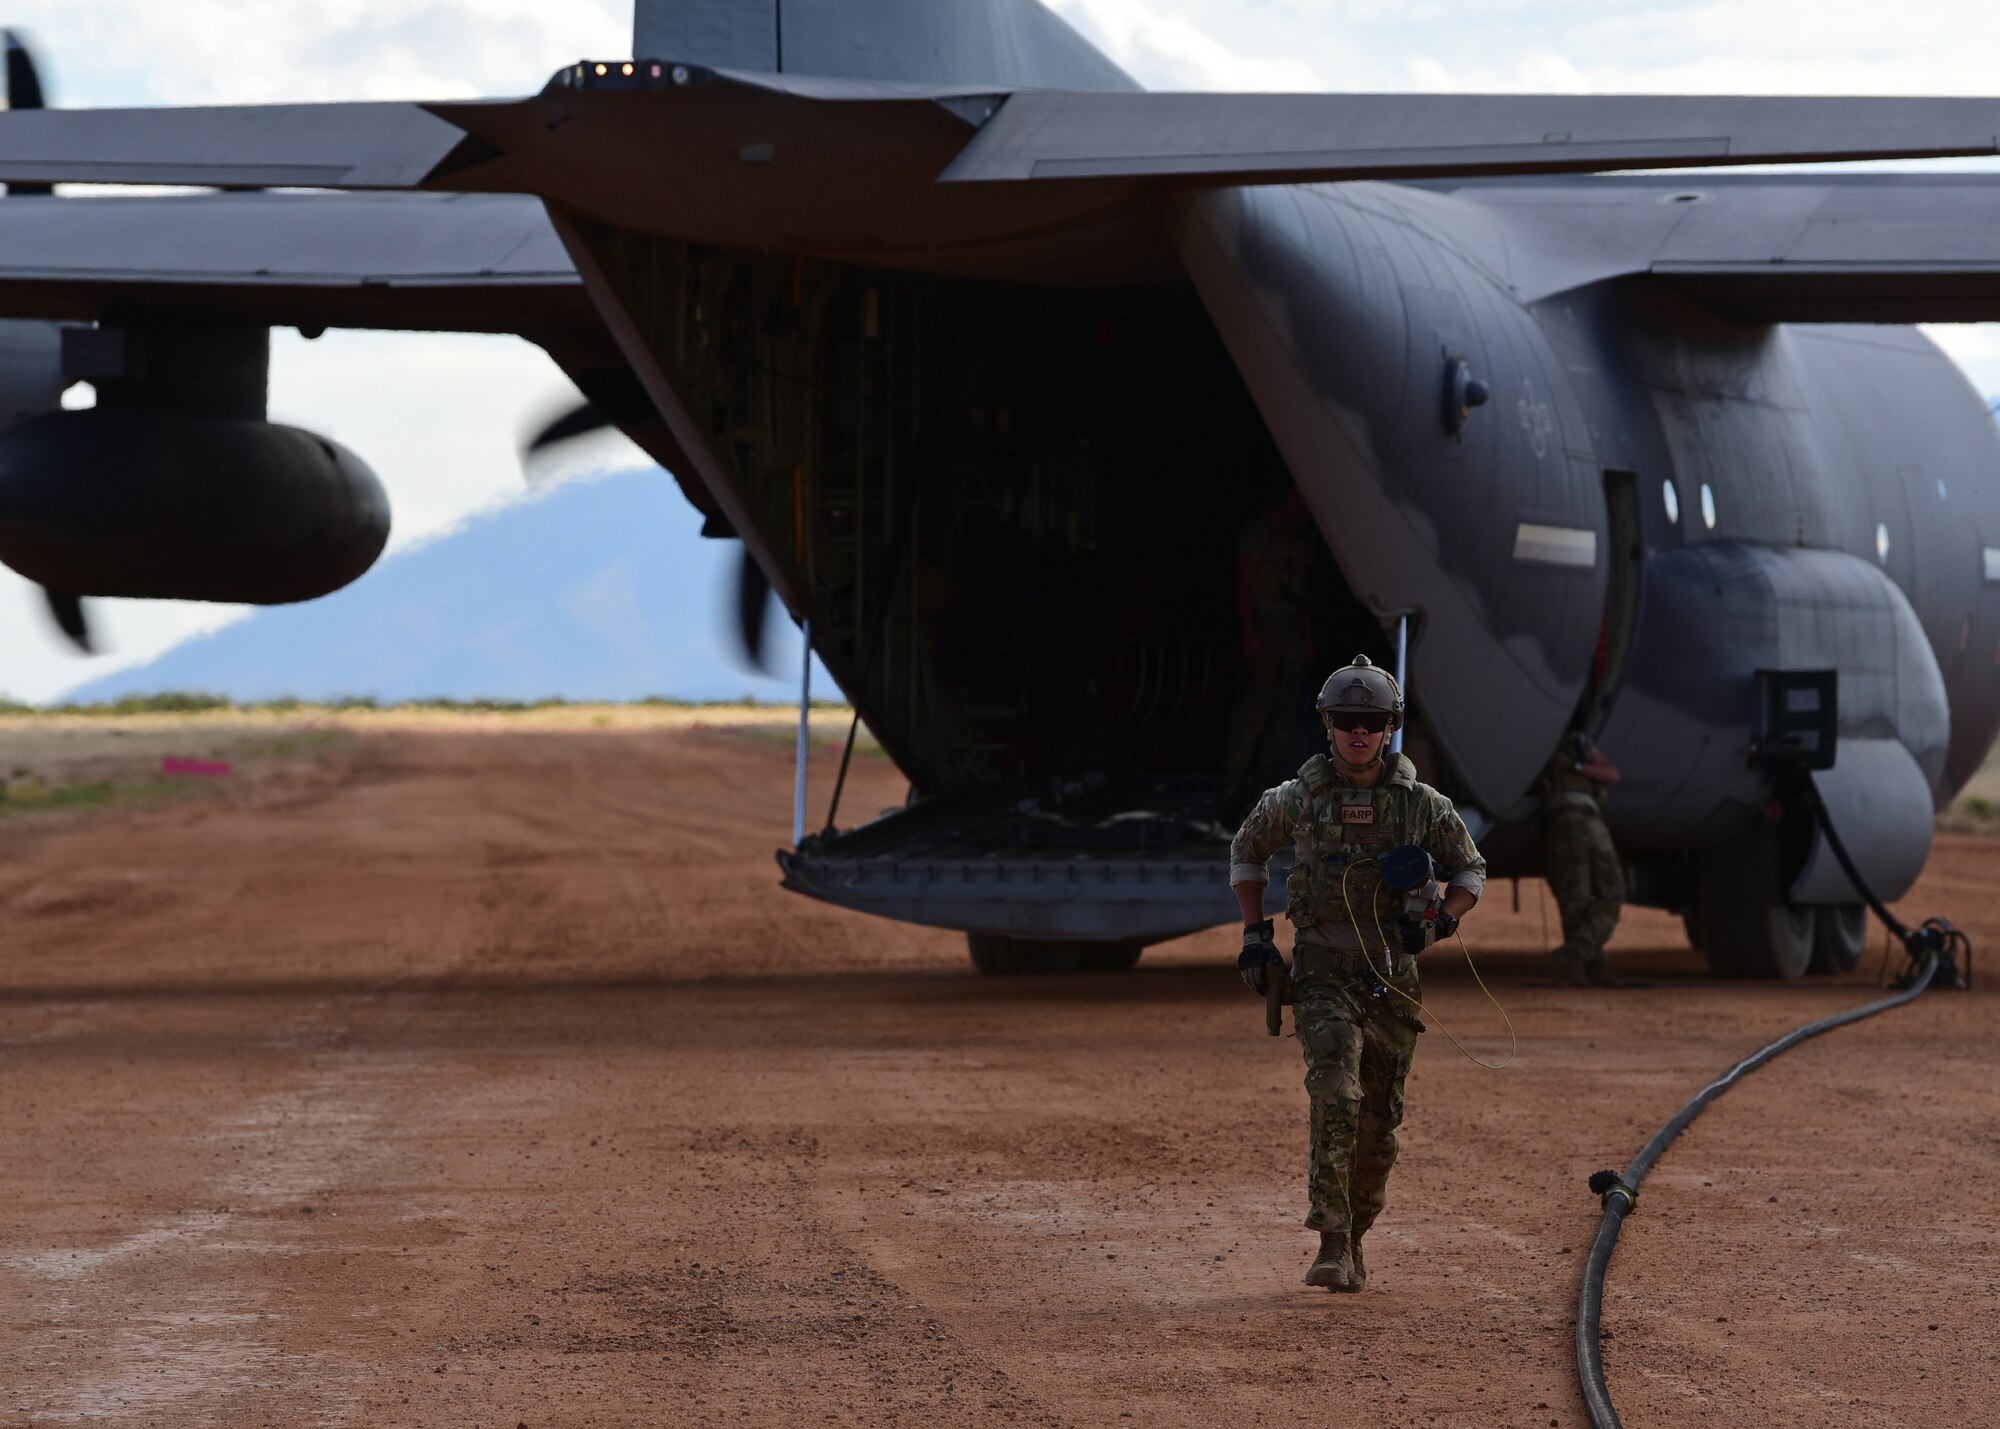 A photo of an airman performing FARP operations during an exercise.